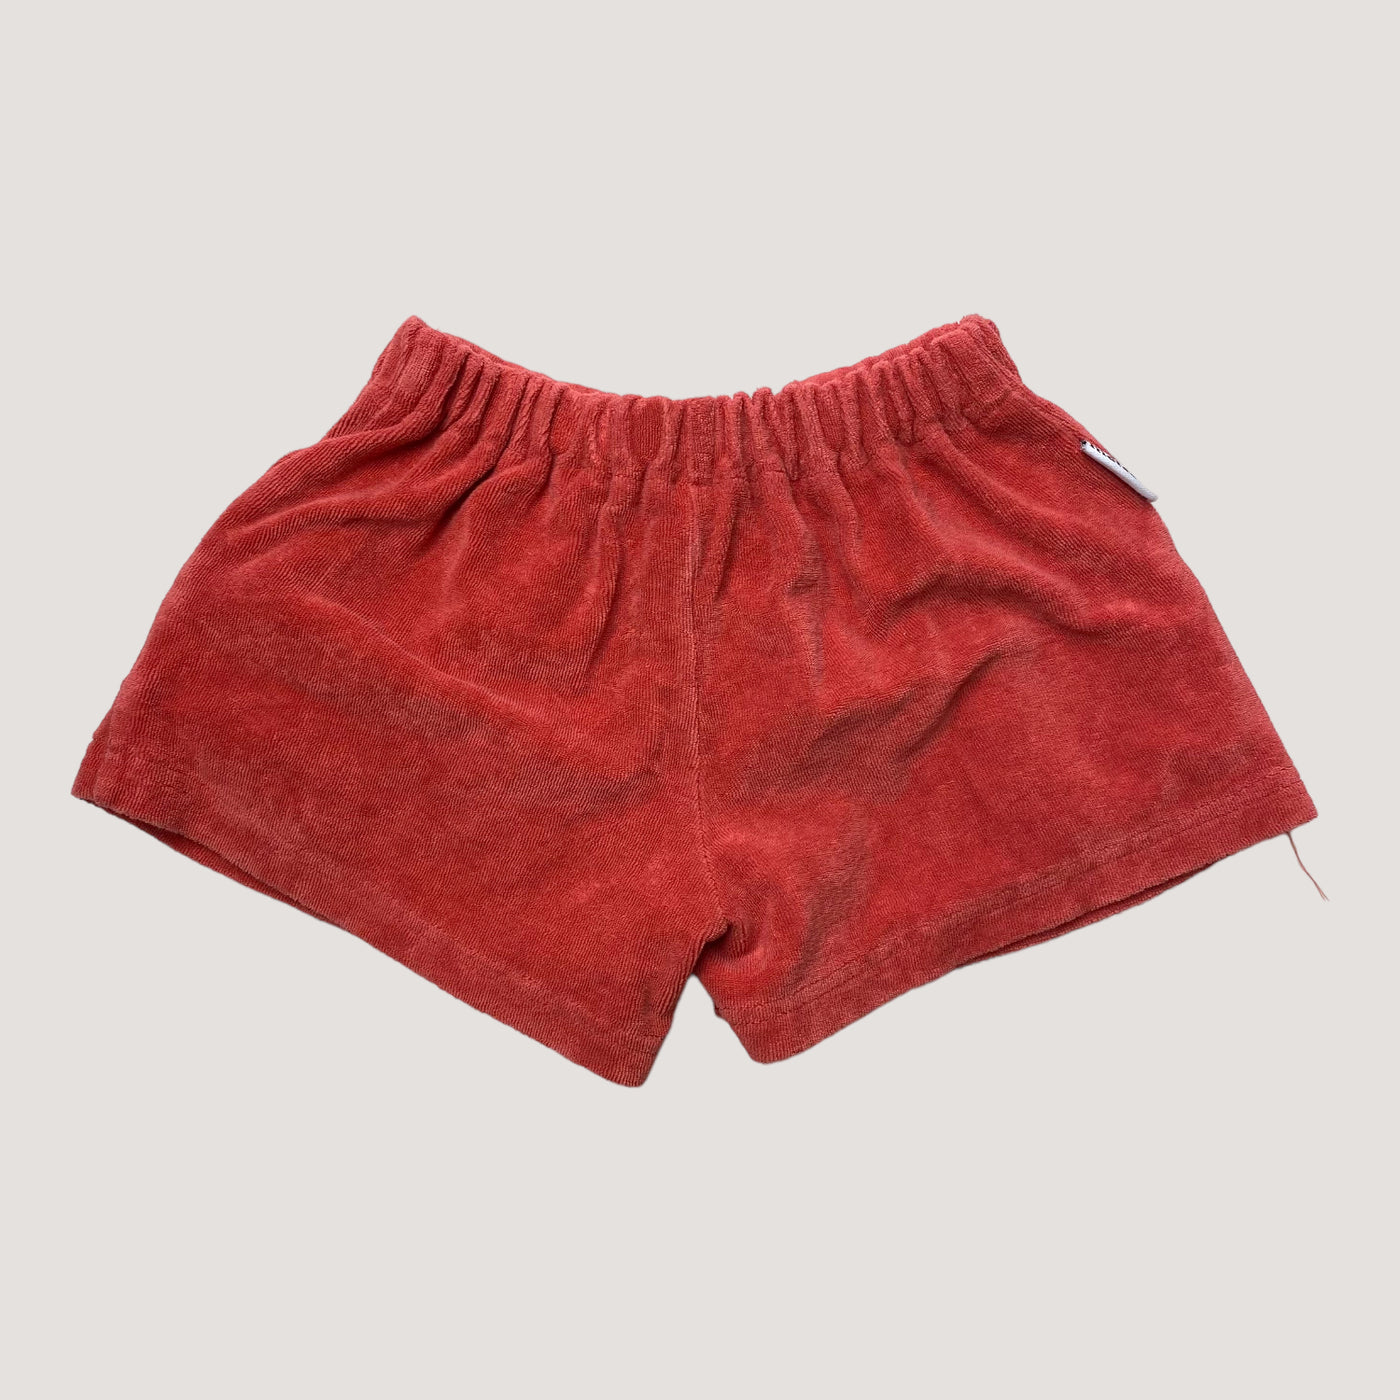 Metsola terry shorts, chili red | 86/92cm